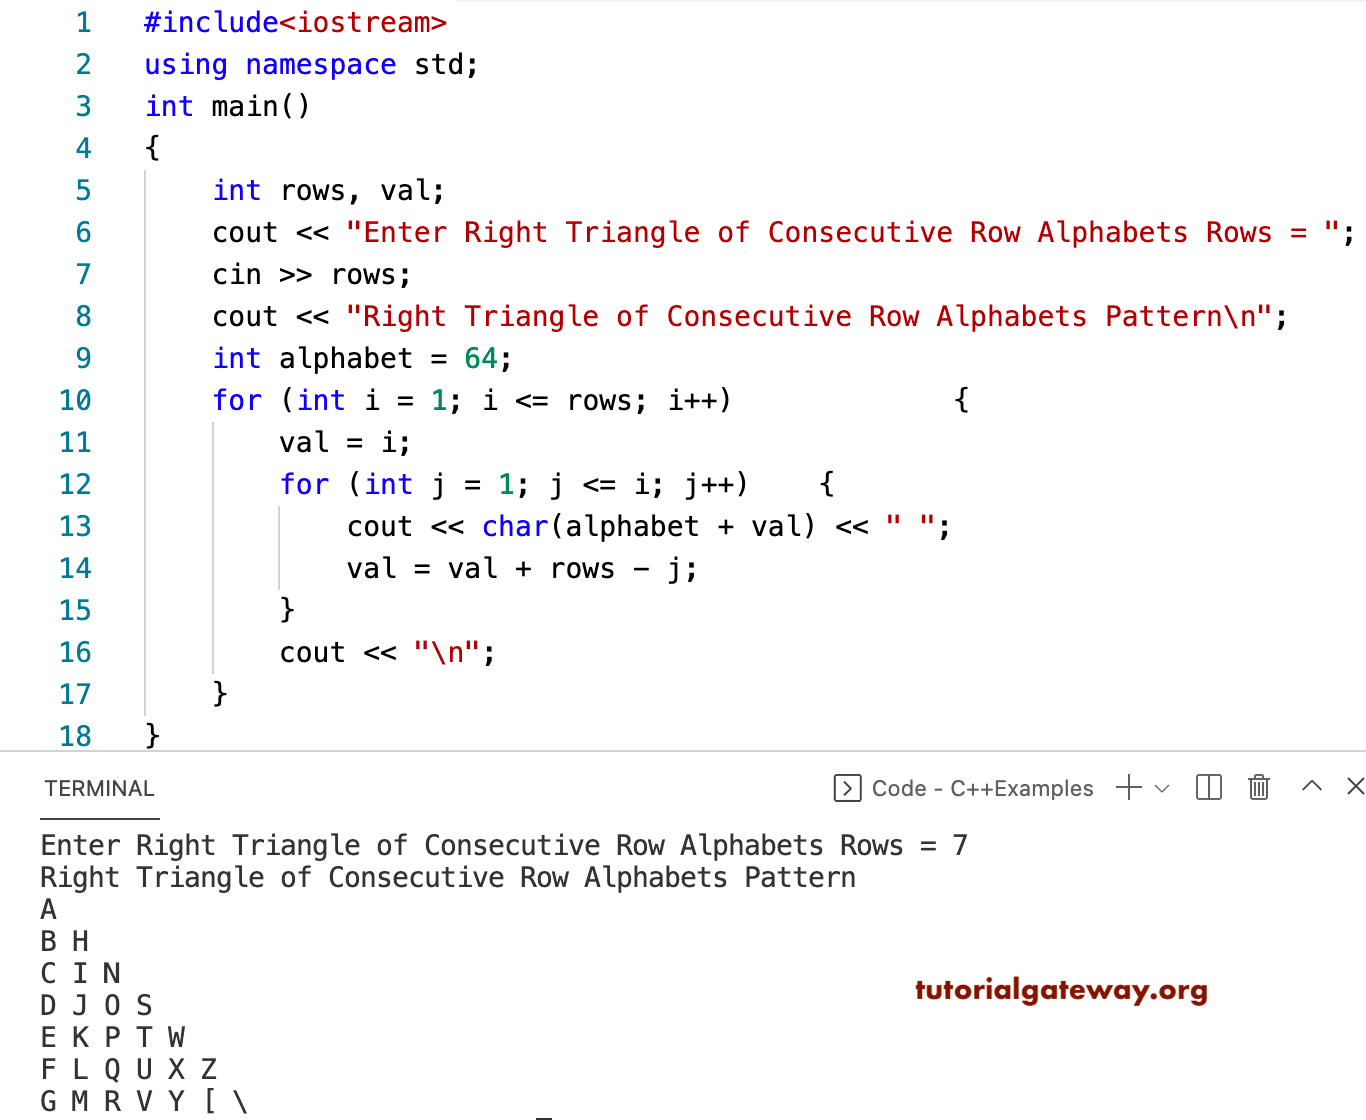 C++ Program to Print Right Triangle of Consecutive Row Alphabets Pattern